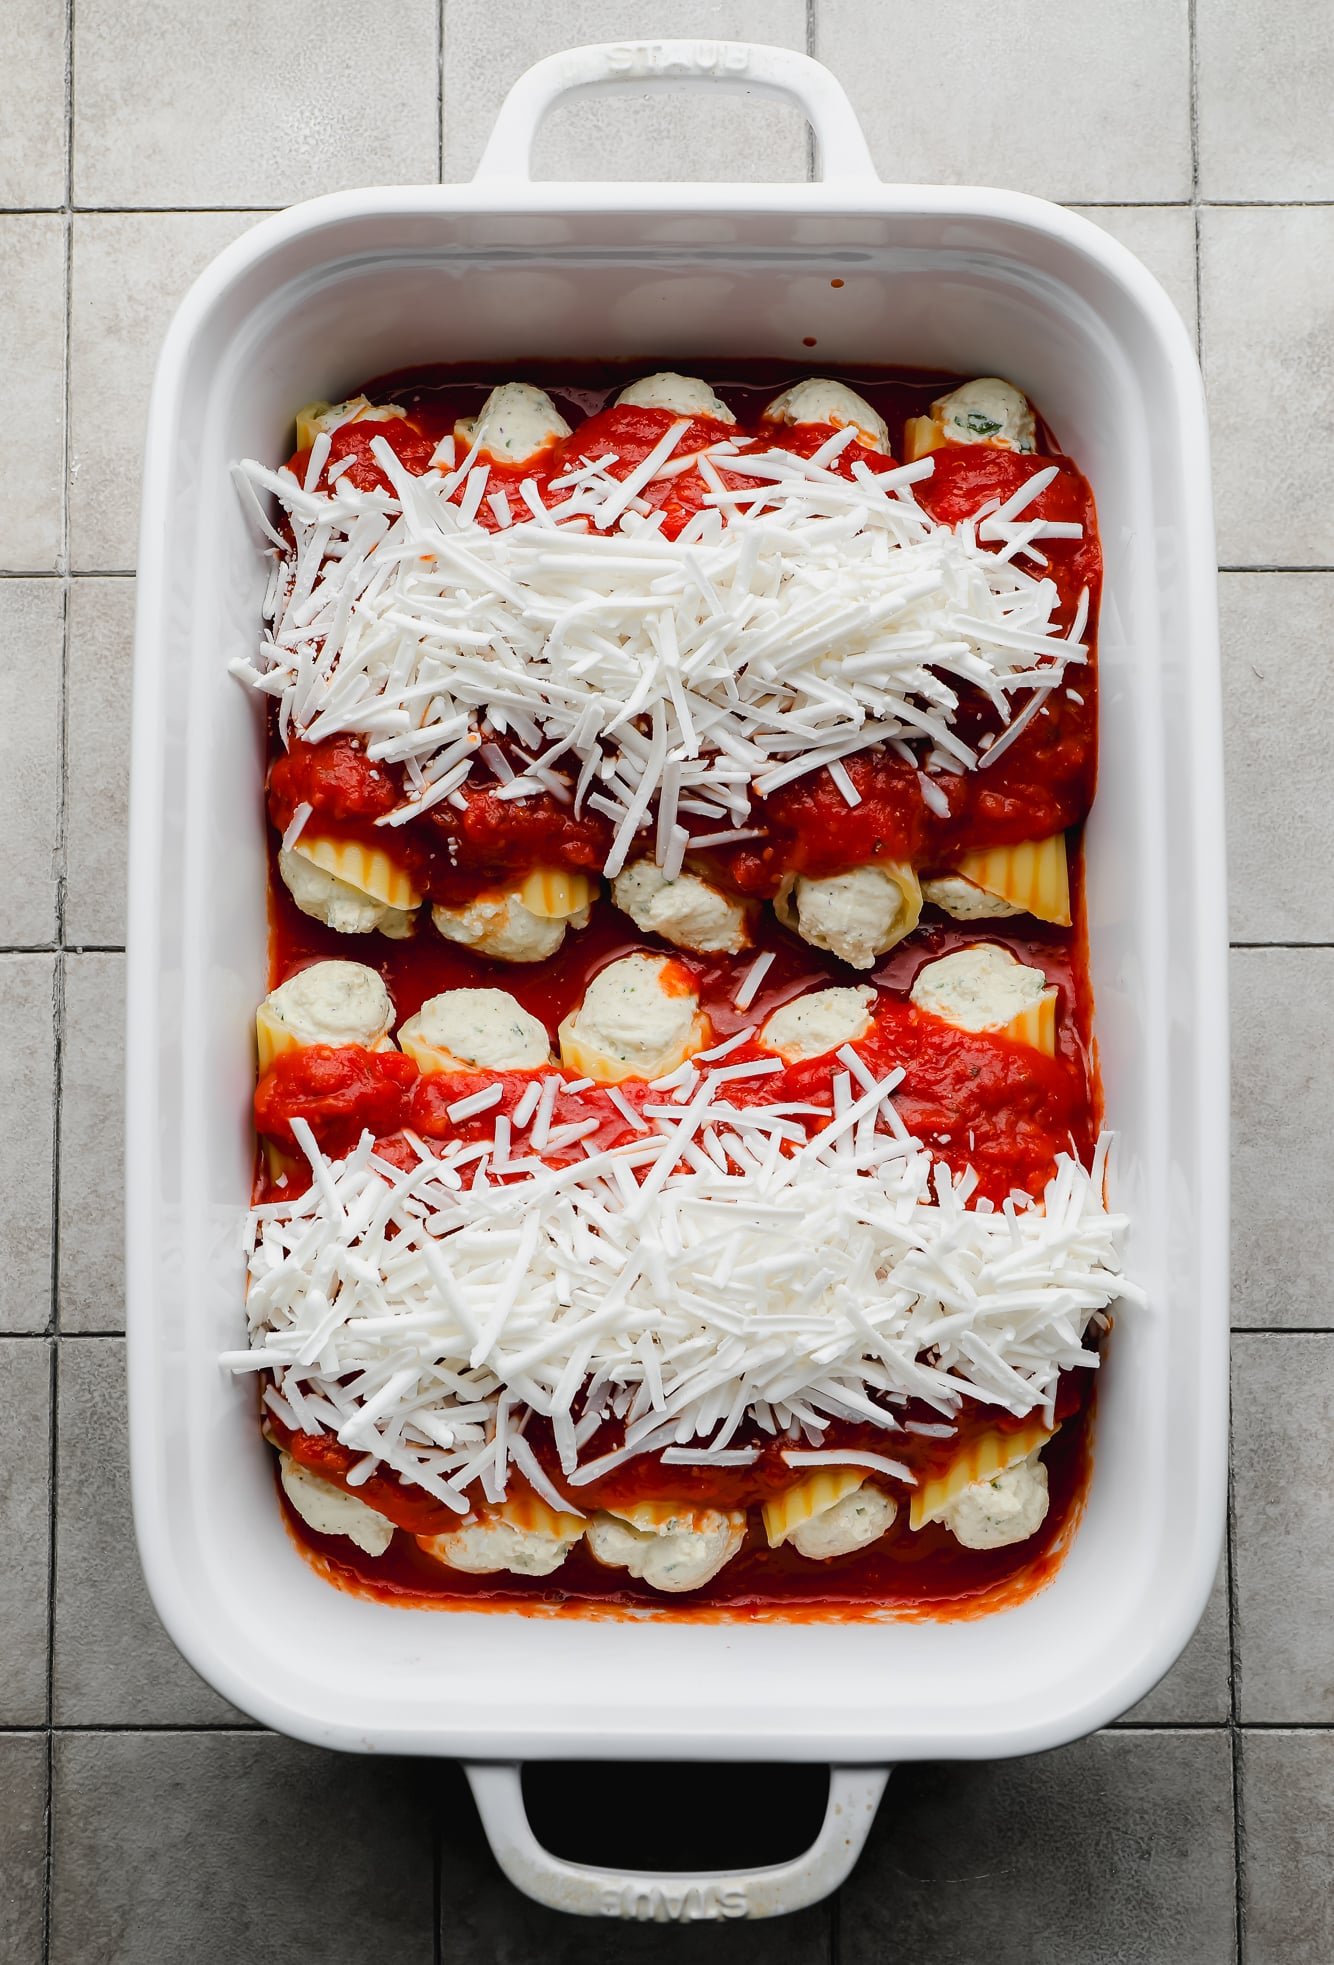 assembled and unbaked Vegan Manicotti in a white baking dish.